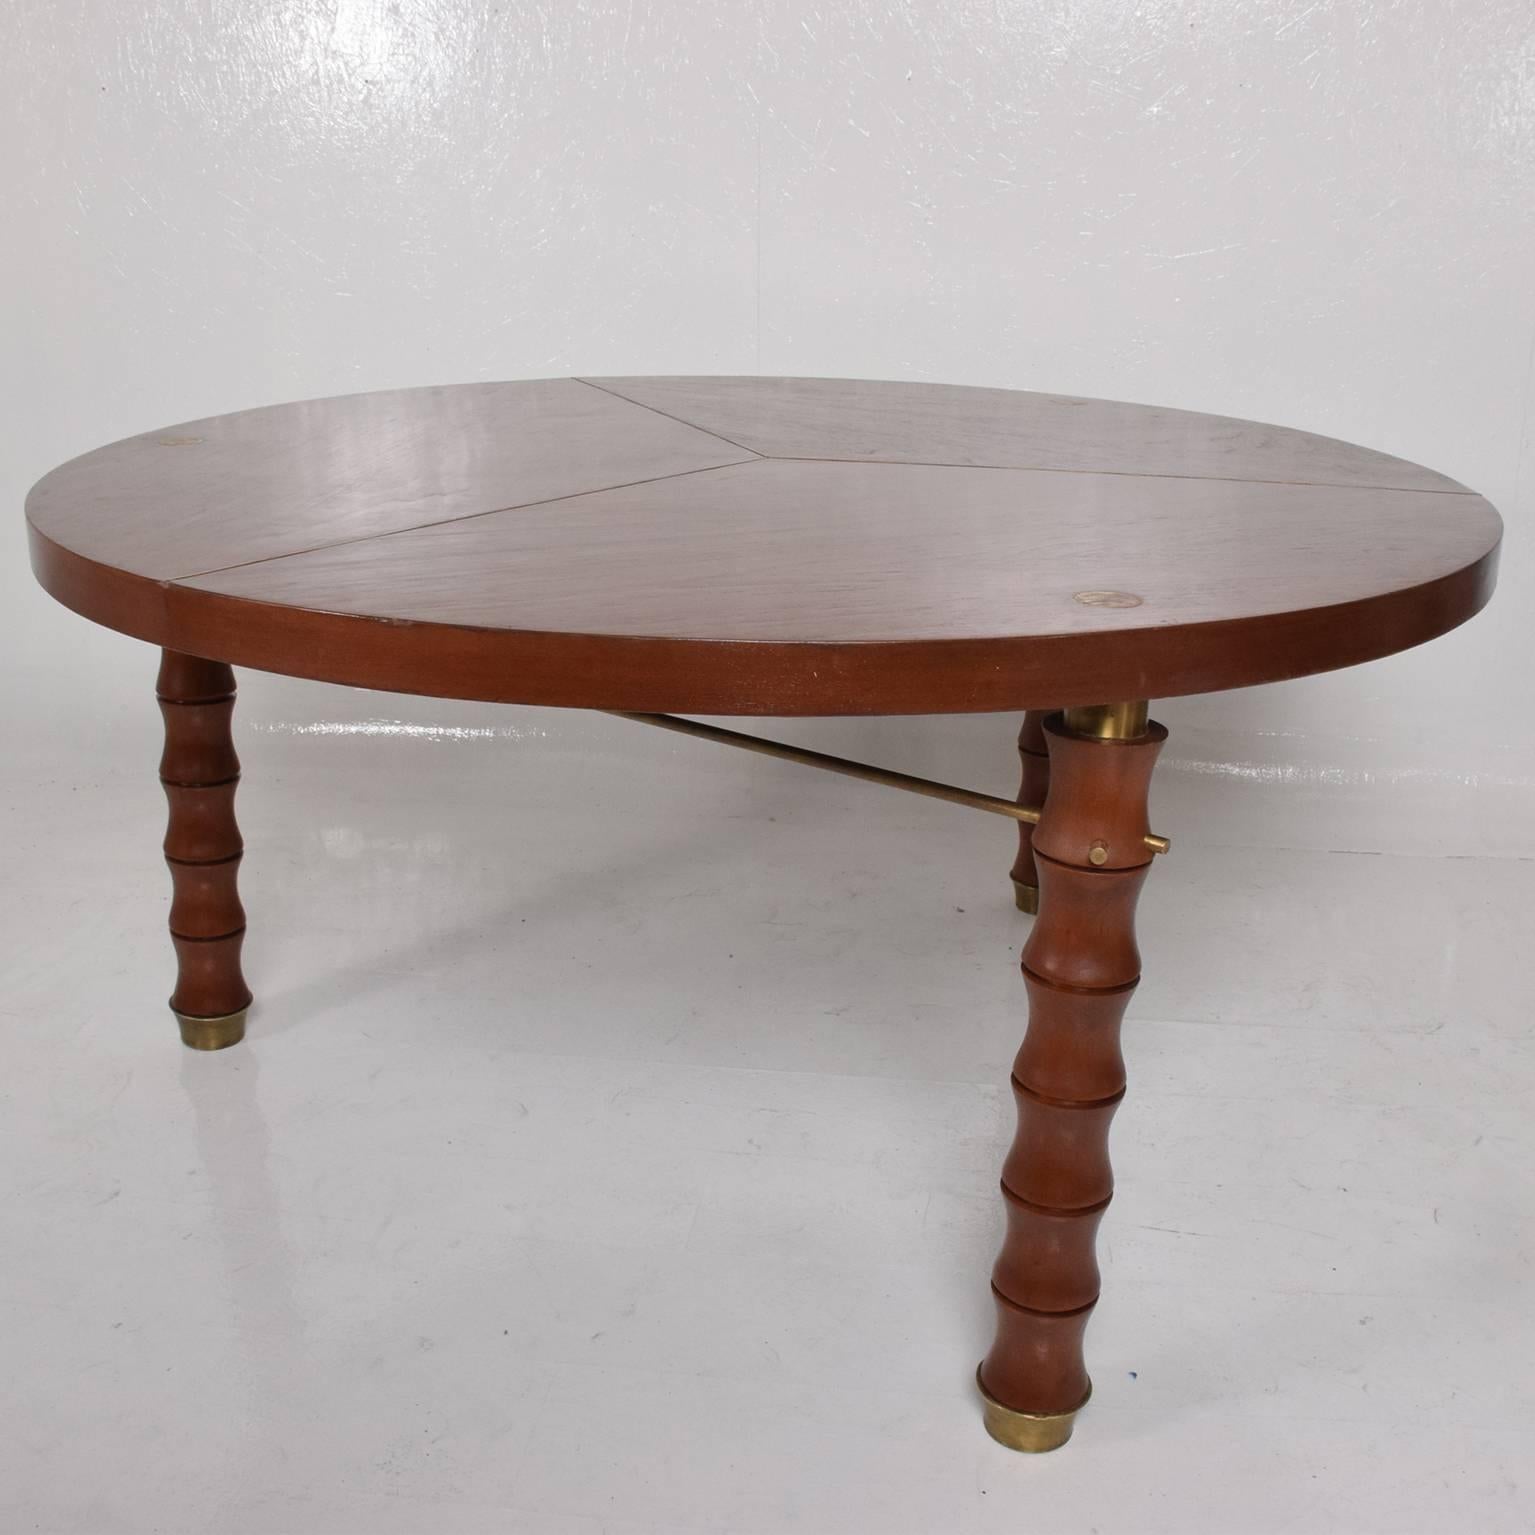 We are pleased to offer for your consideration a beautiful round dining table. Attributed to Frank Kyle, custom work, Mexico City circa 1960s.

Mahogany wood with brass accents. 
Unmarked, no label or signature present. Price per table